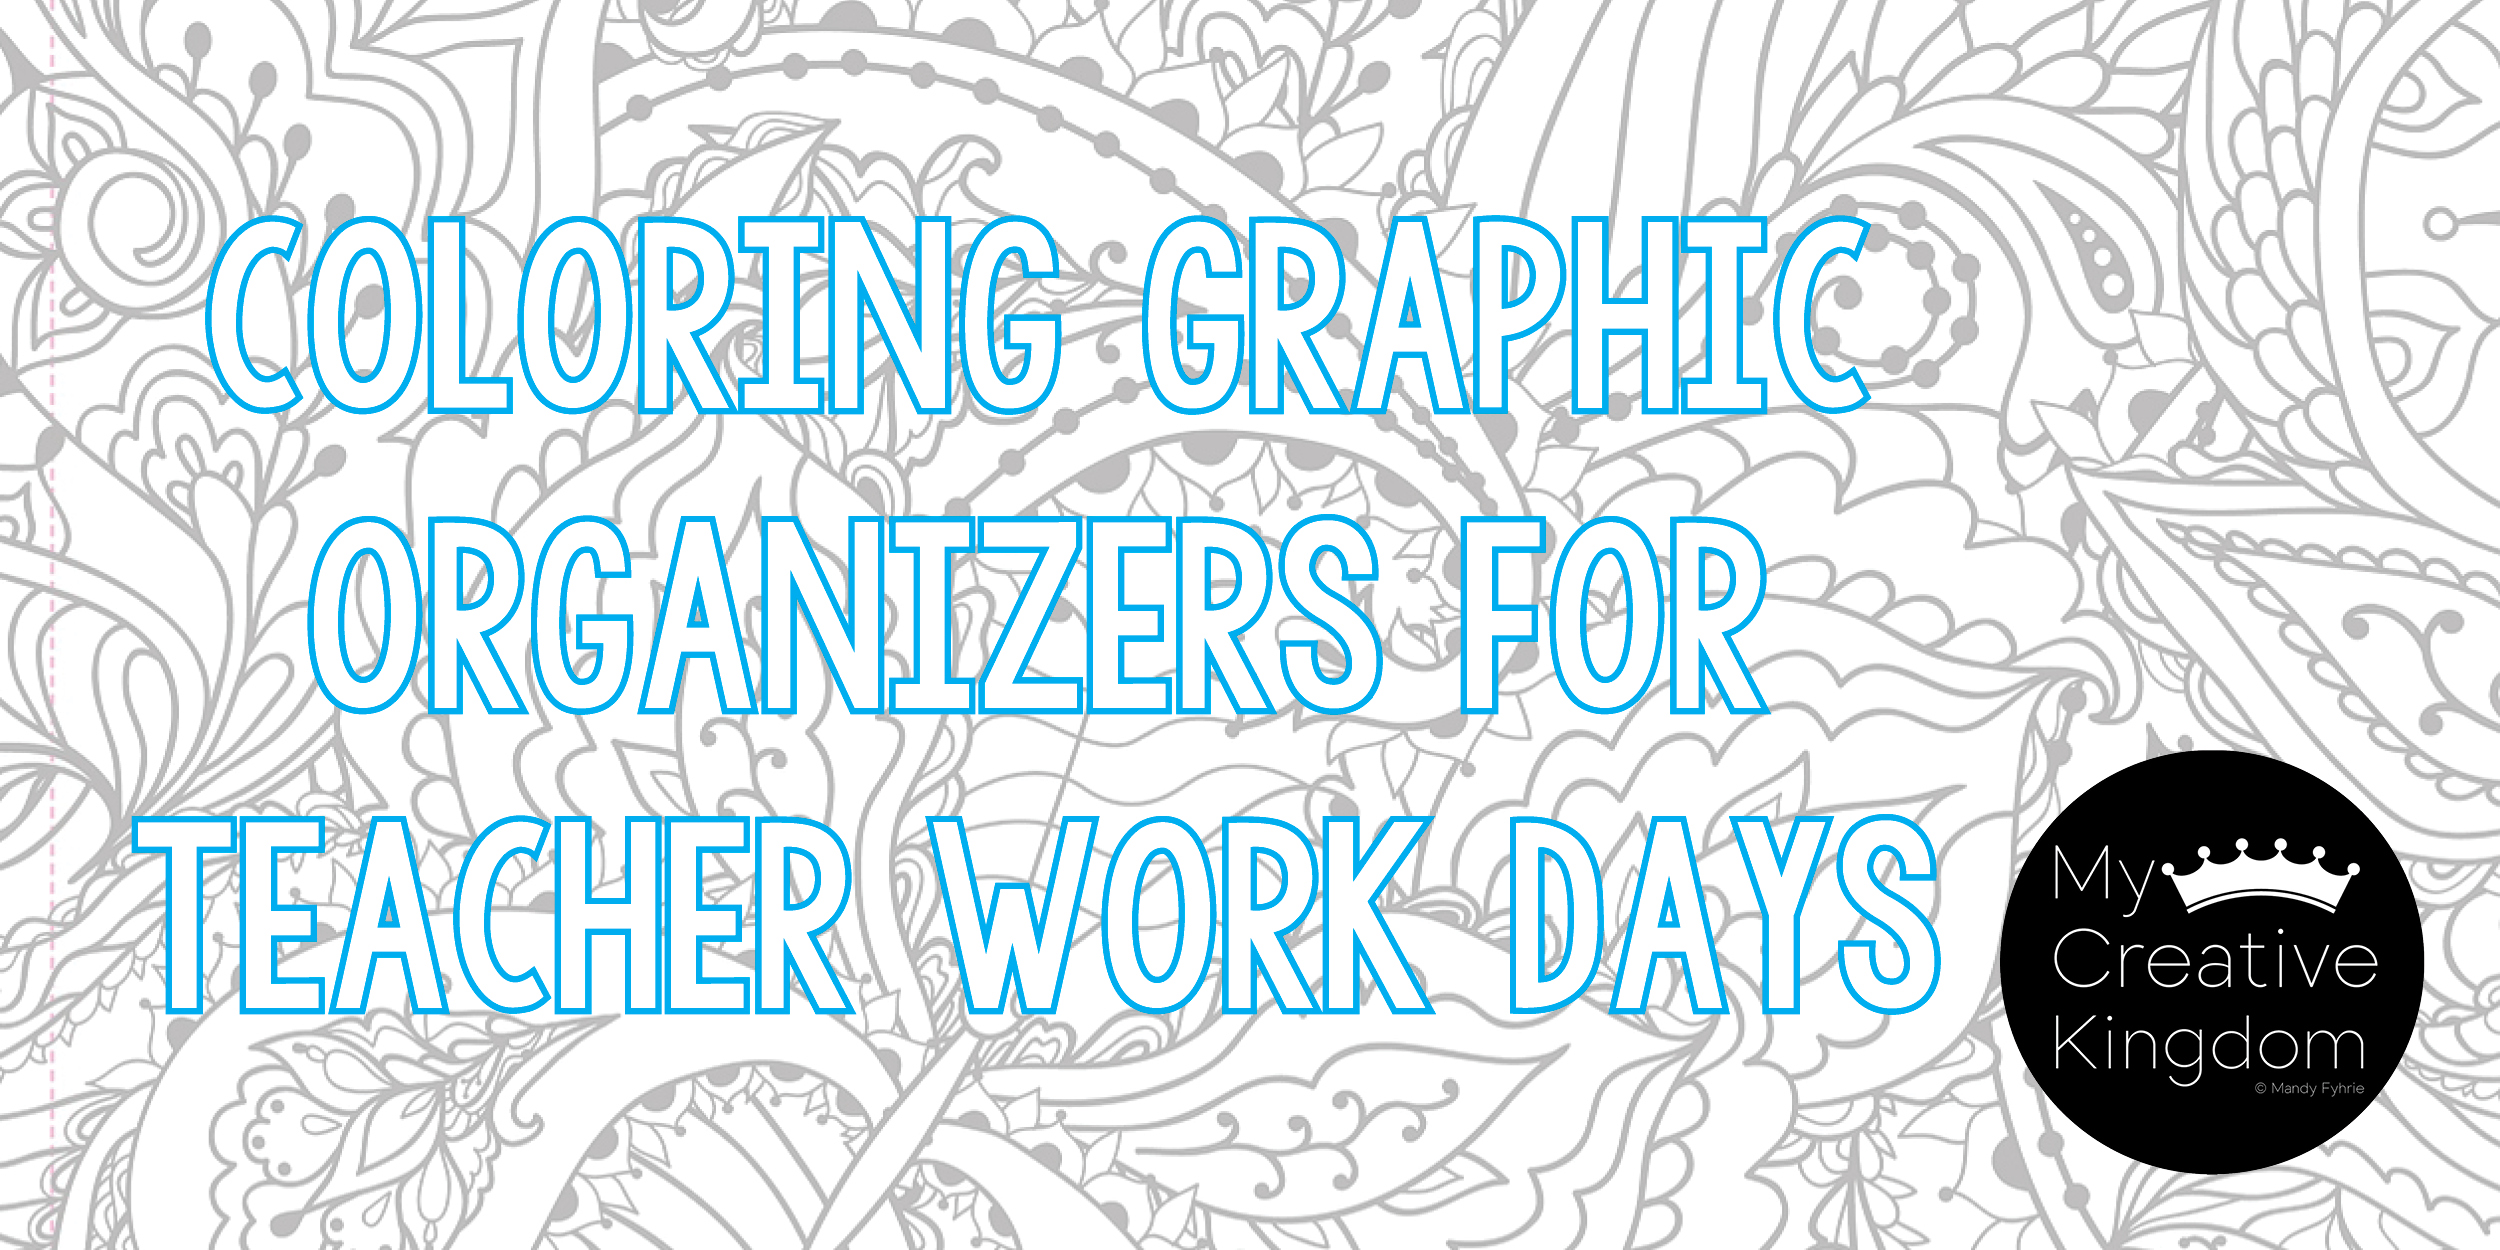 Coloring Graphic Organizer for note taking at Teacher Work Days